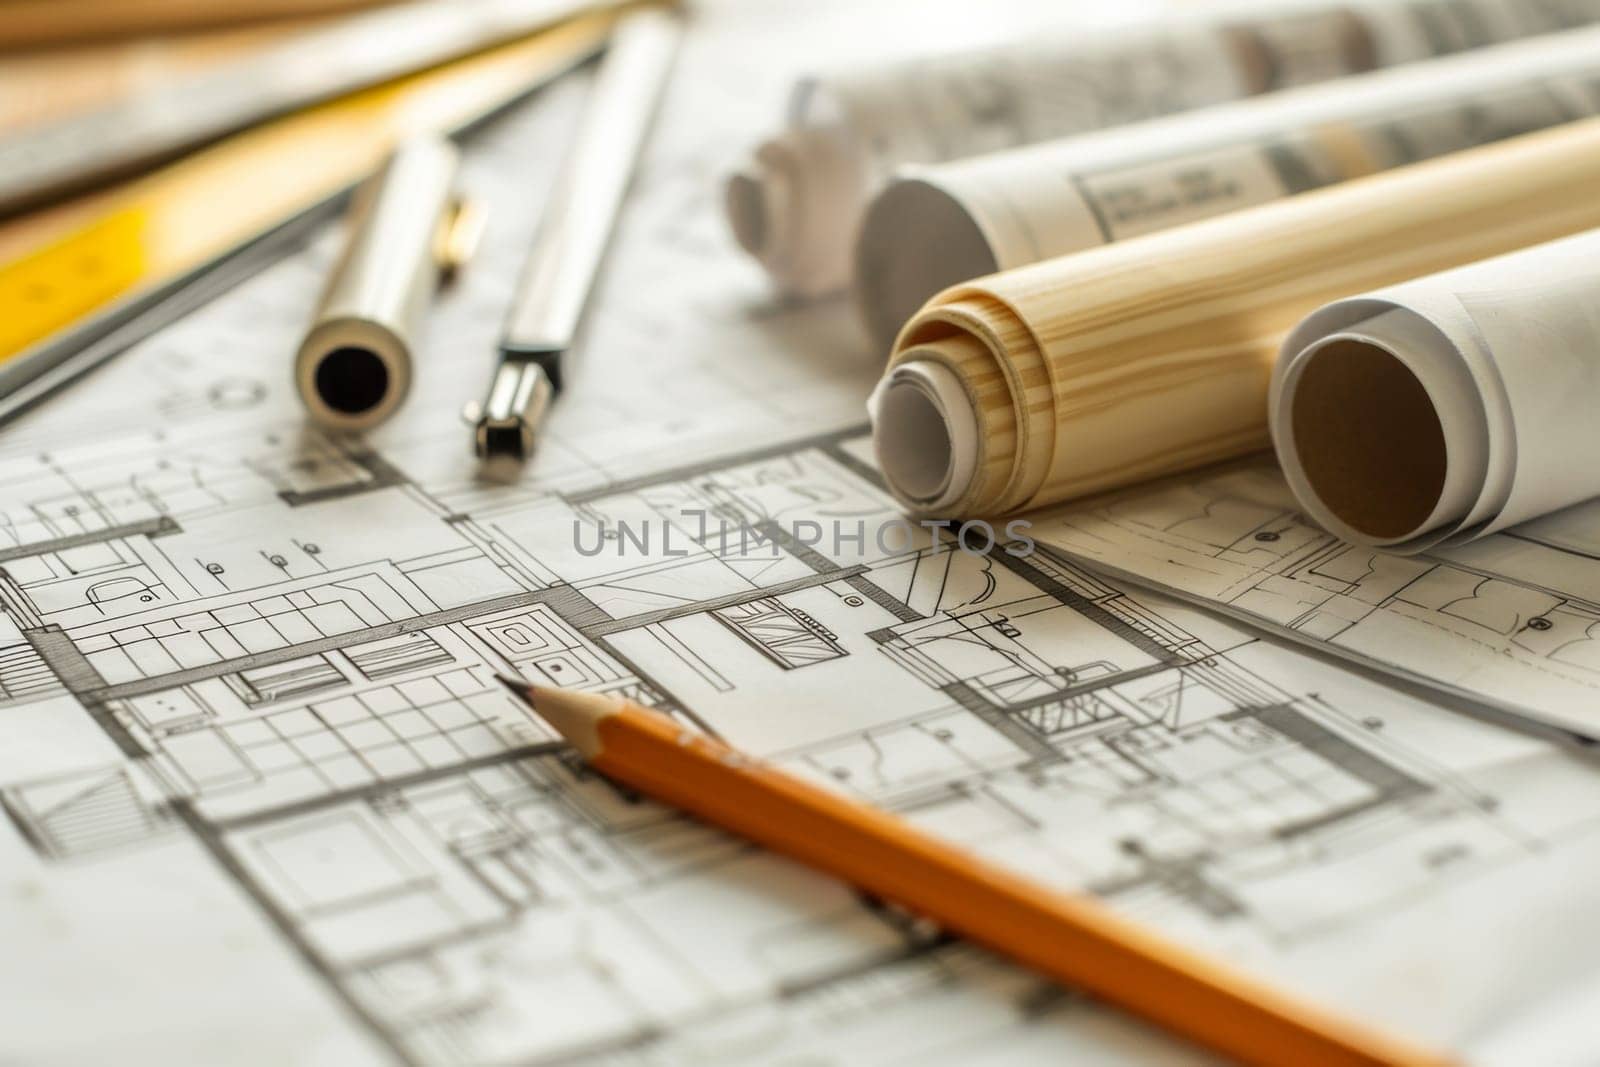 Architectural drawings and pencils are scattered on top of a blueprint, showcasing an artistic and imaginative process of design and construction.